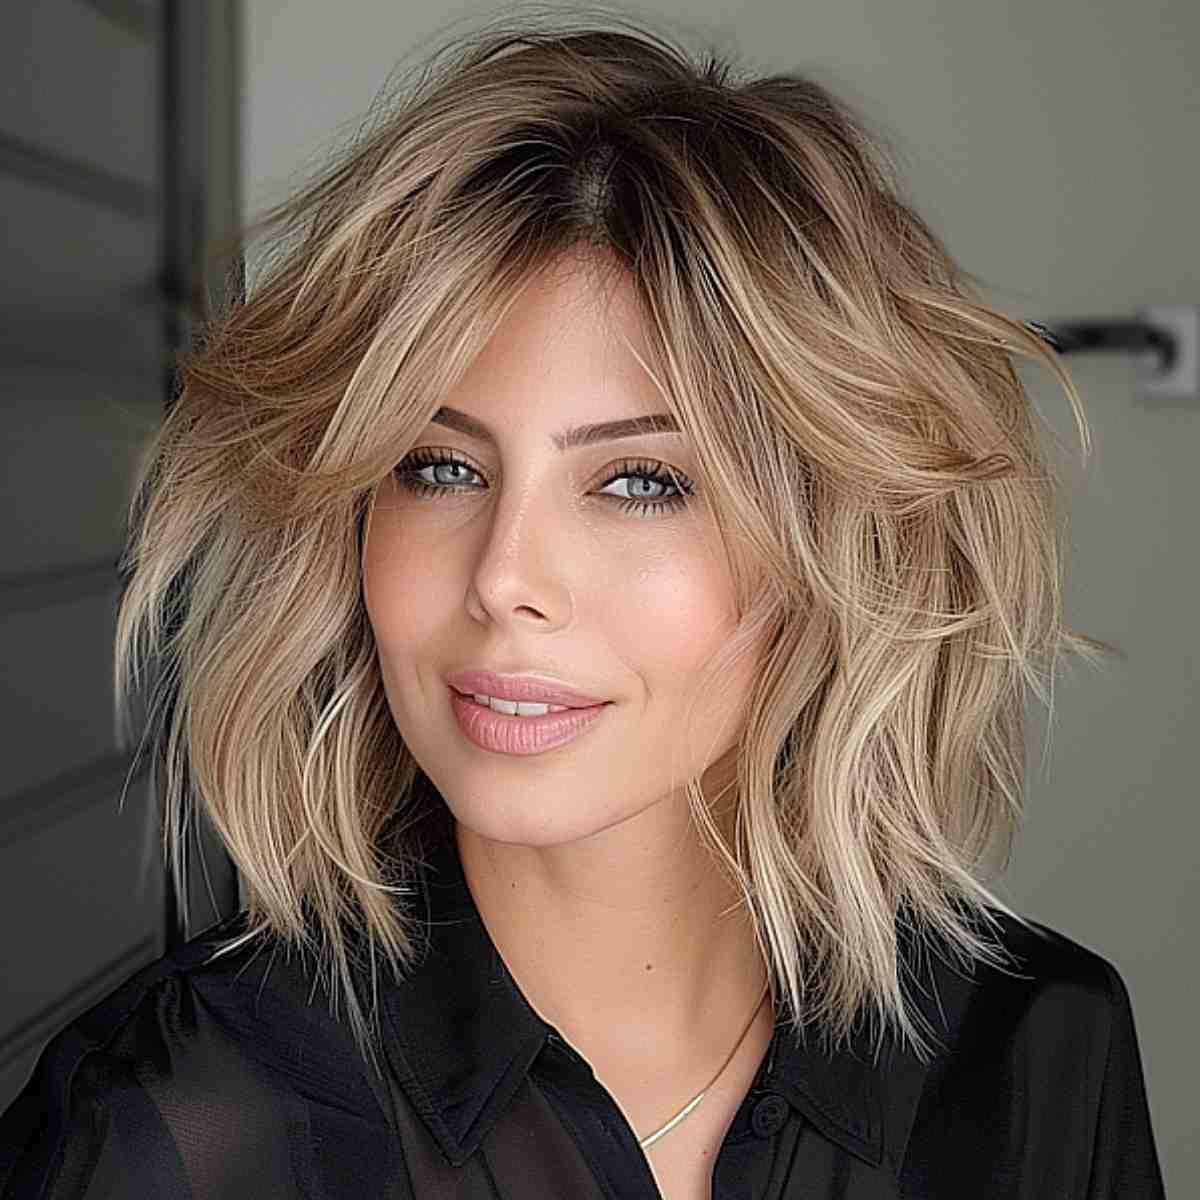 20 Short Messy Hair Ideas To Try in 2023